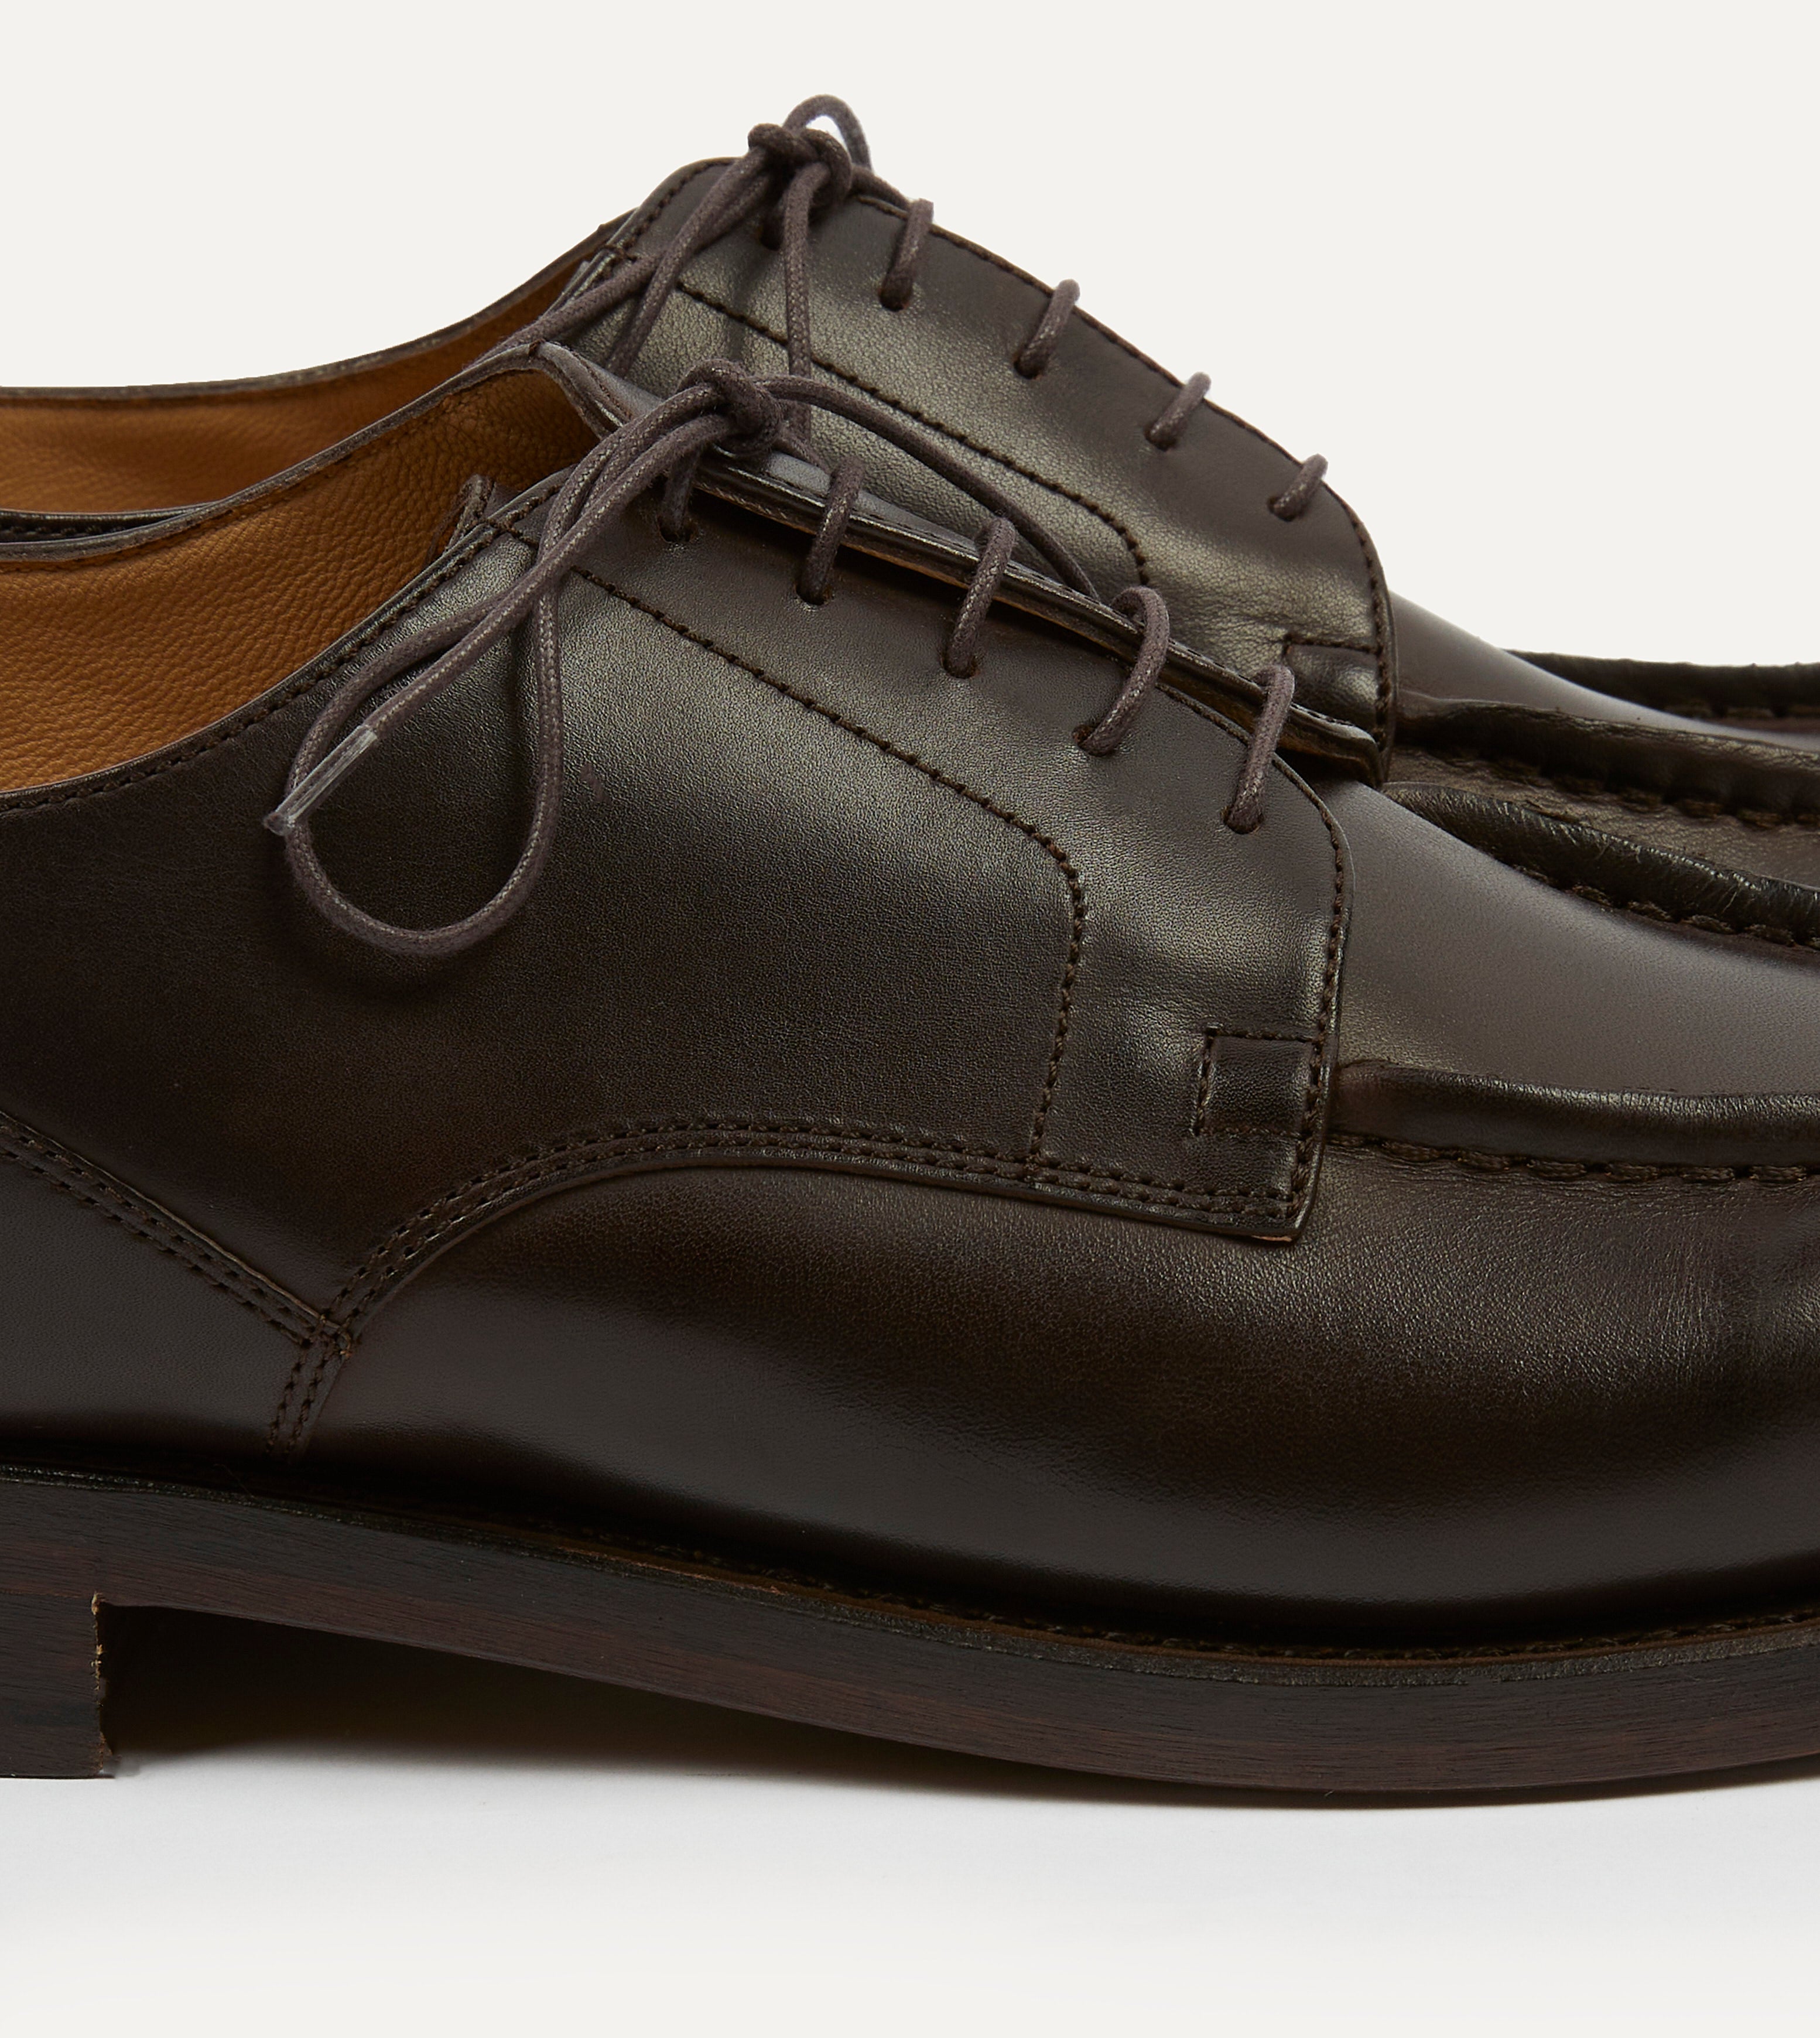 Paraboot Chambord Brown Calf Leather Derby Shoe – Drakes US